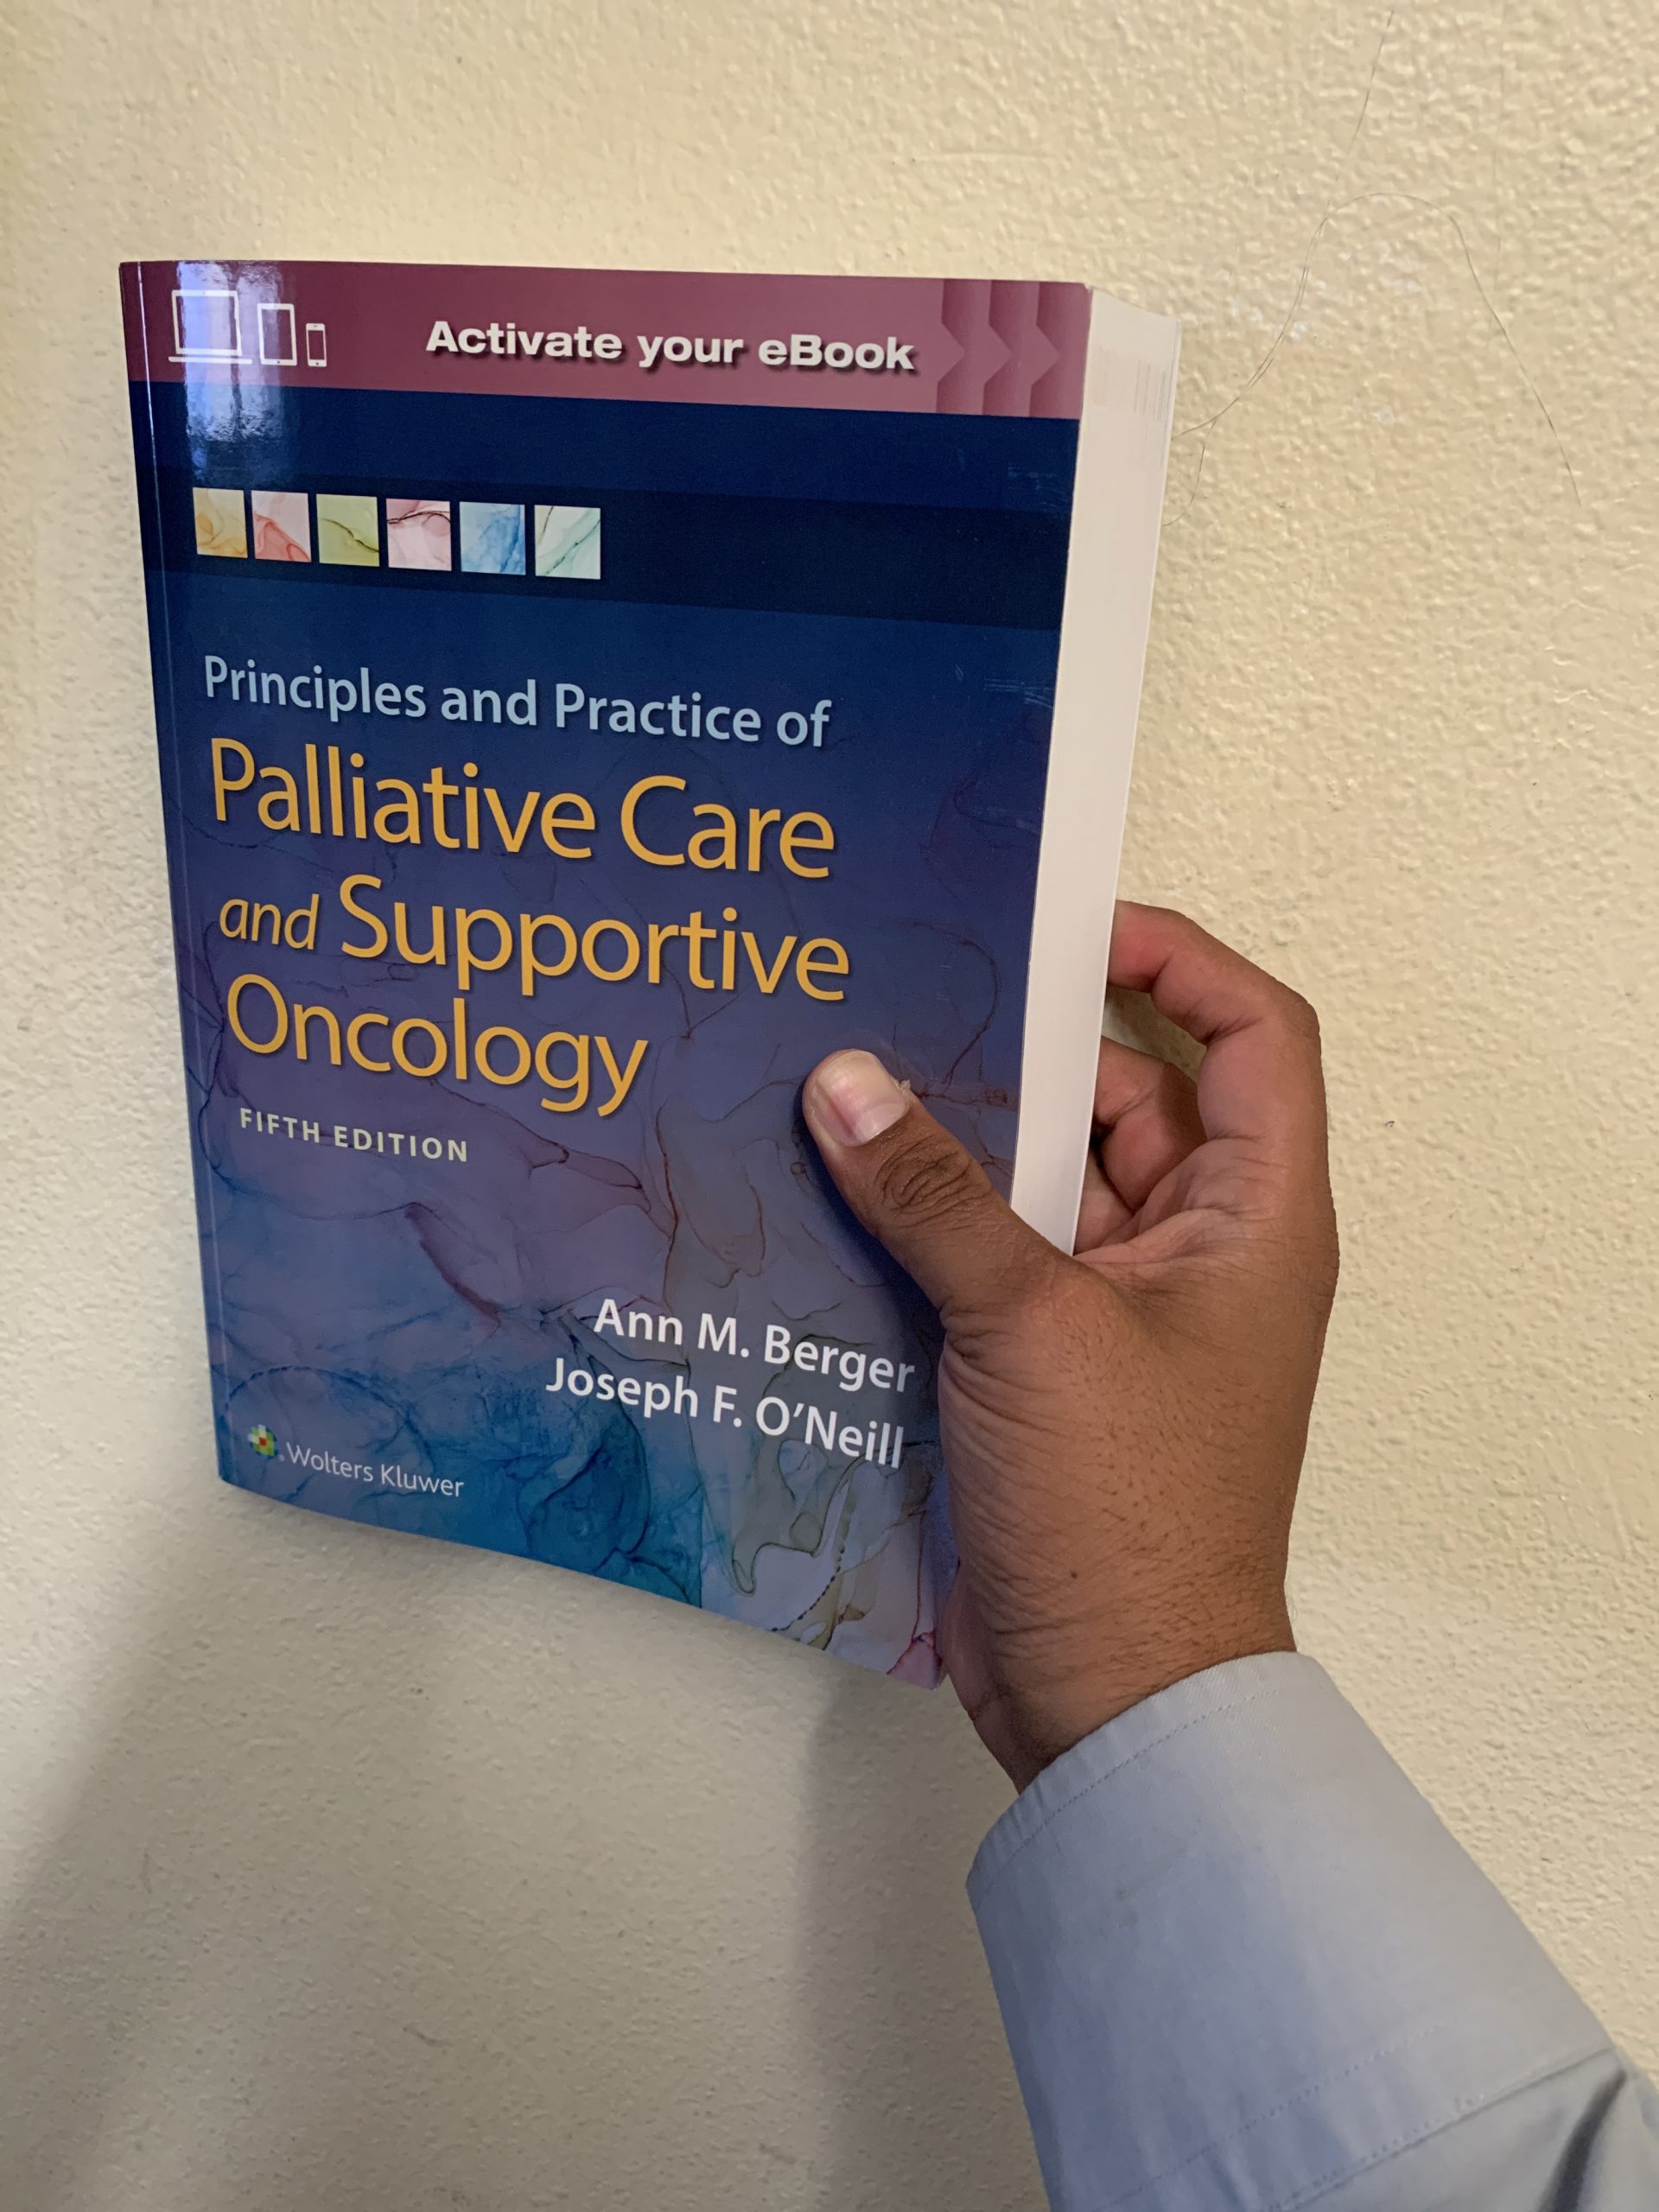 Malani S, Brown M, Streufert J, Aggarwal SK. Cannabinoids. In A.M. Berger and J. O’Neill. (Eds.), Pediatric and Adult Palliative Care and Support Oncology, 5th Edition Wolters Kluwer. 2021.